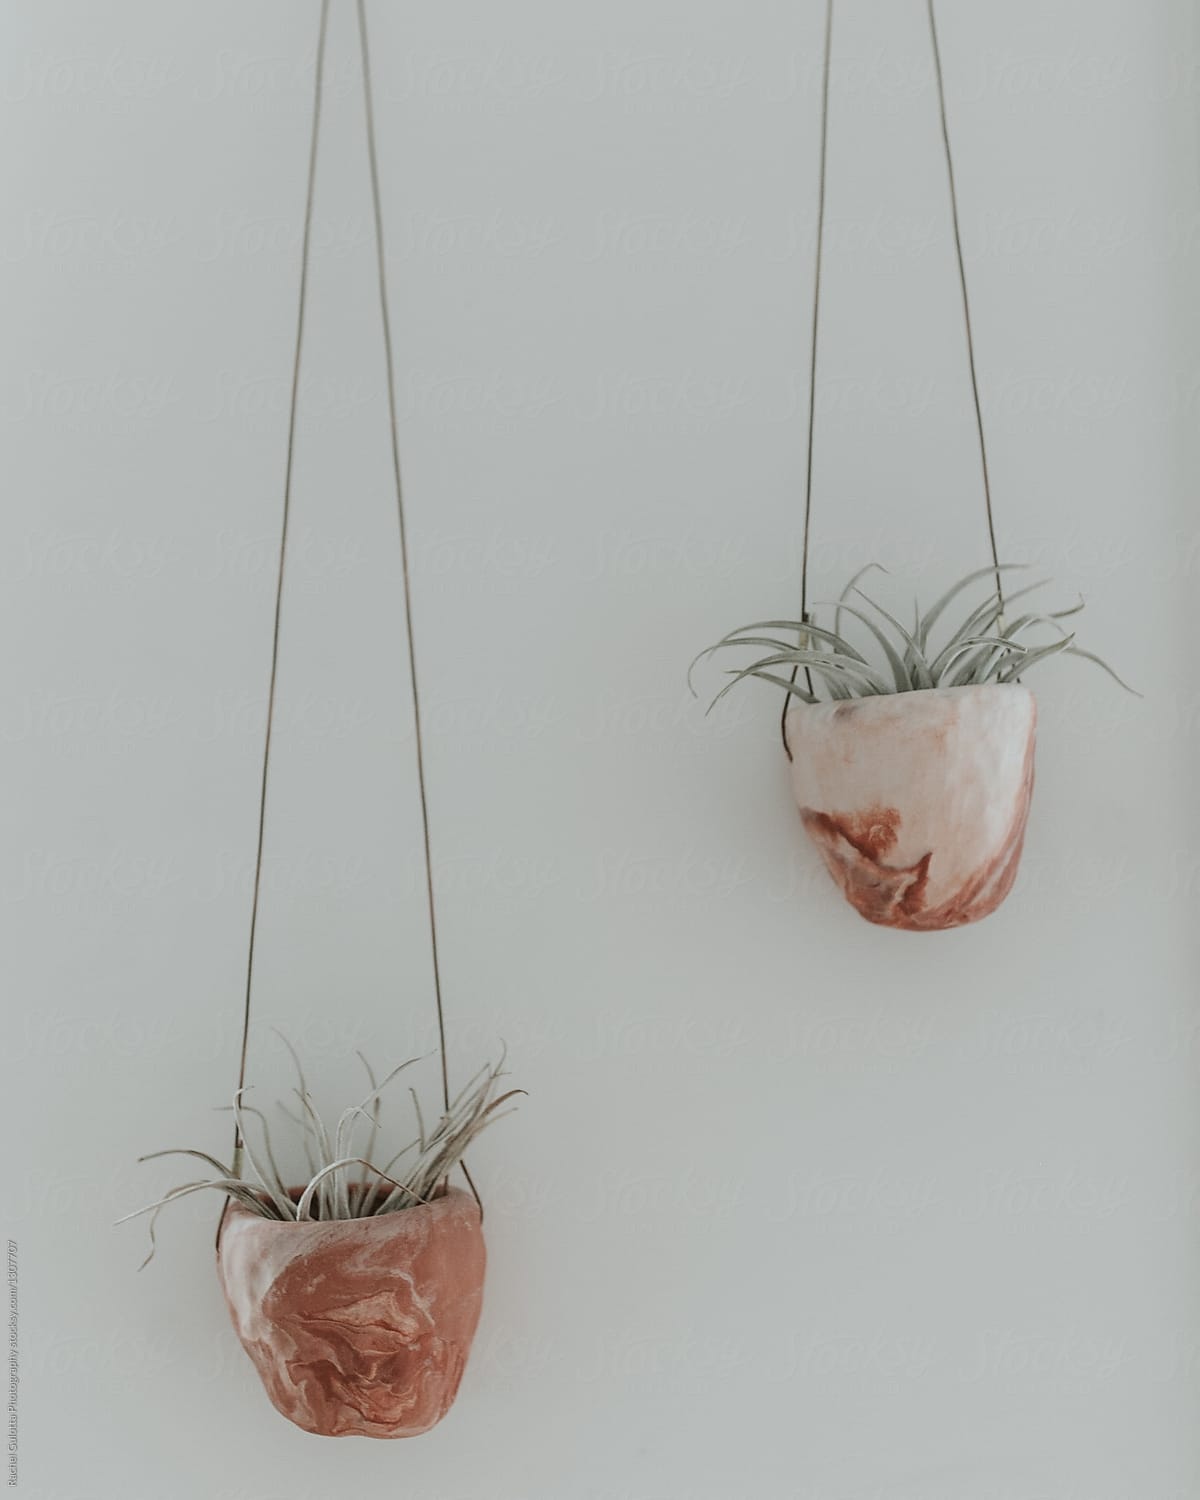 Air Plants Hanging in Clay Planters on White Wall